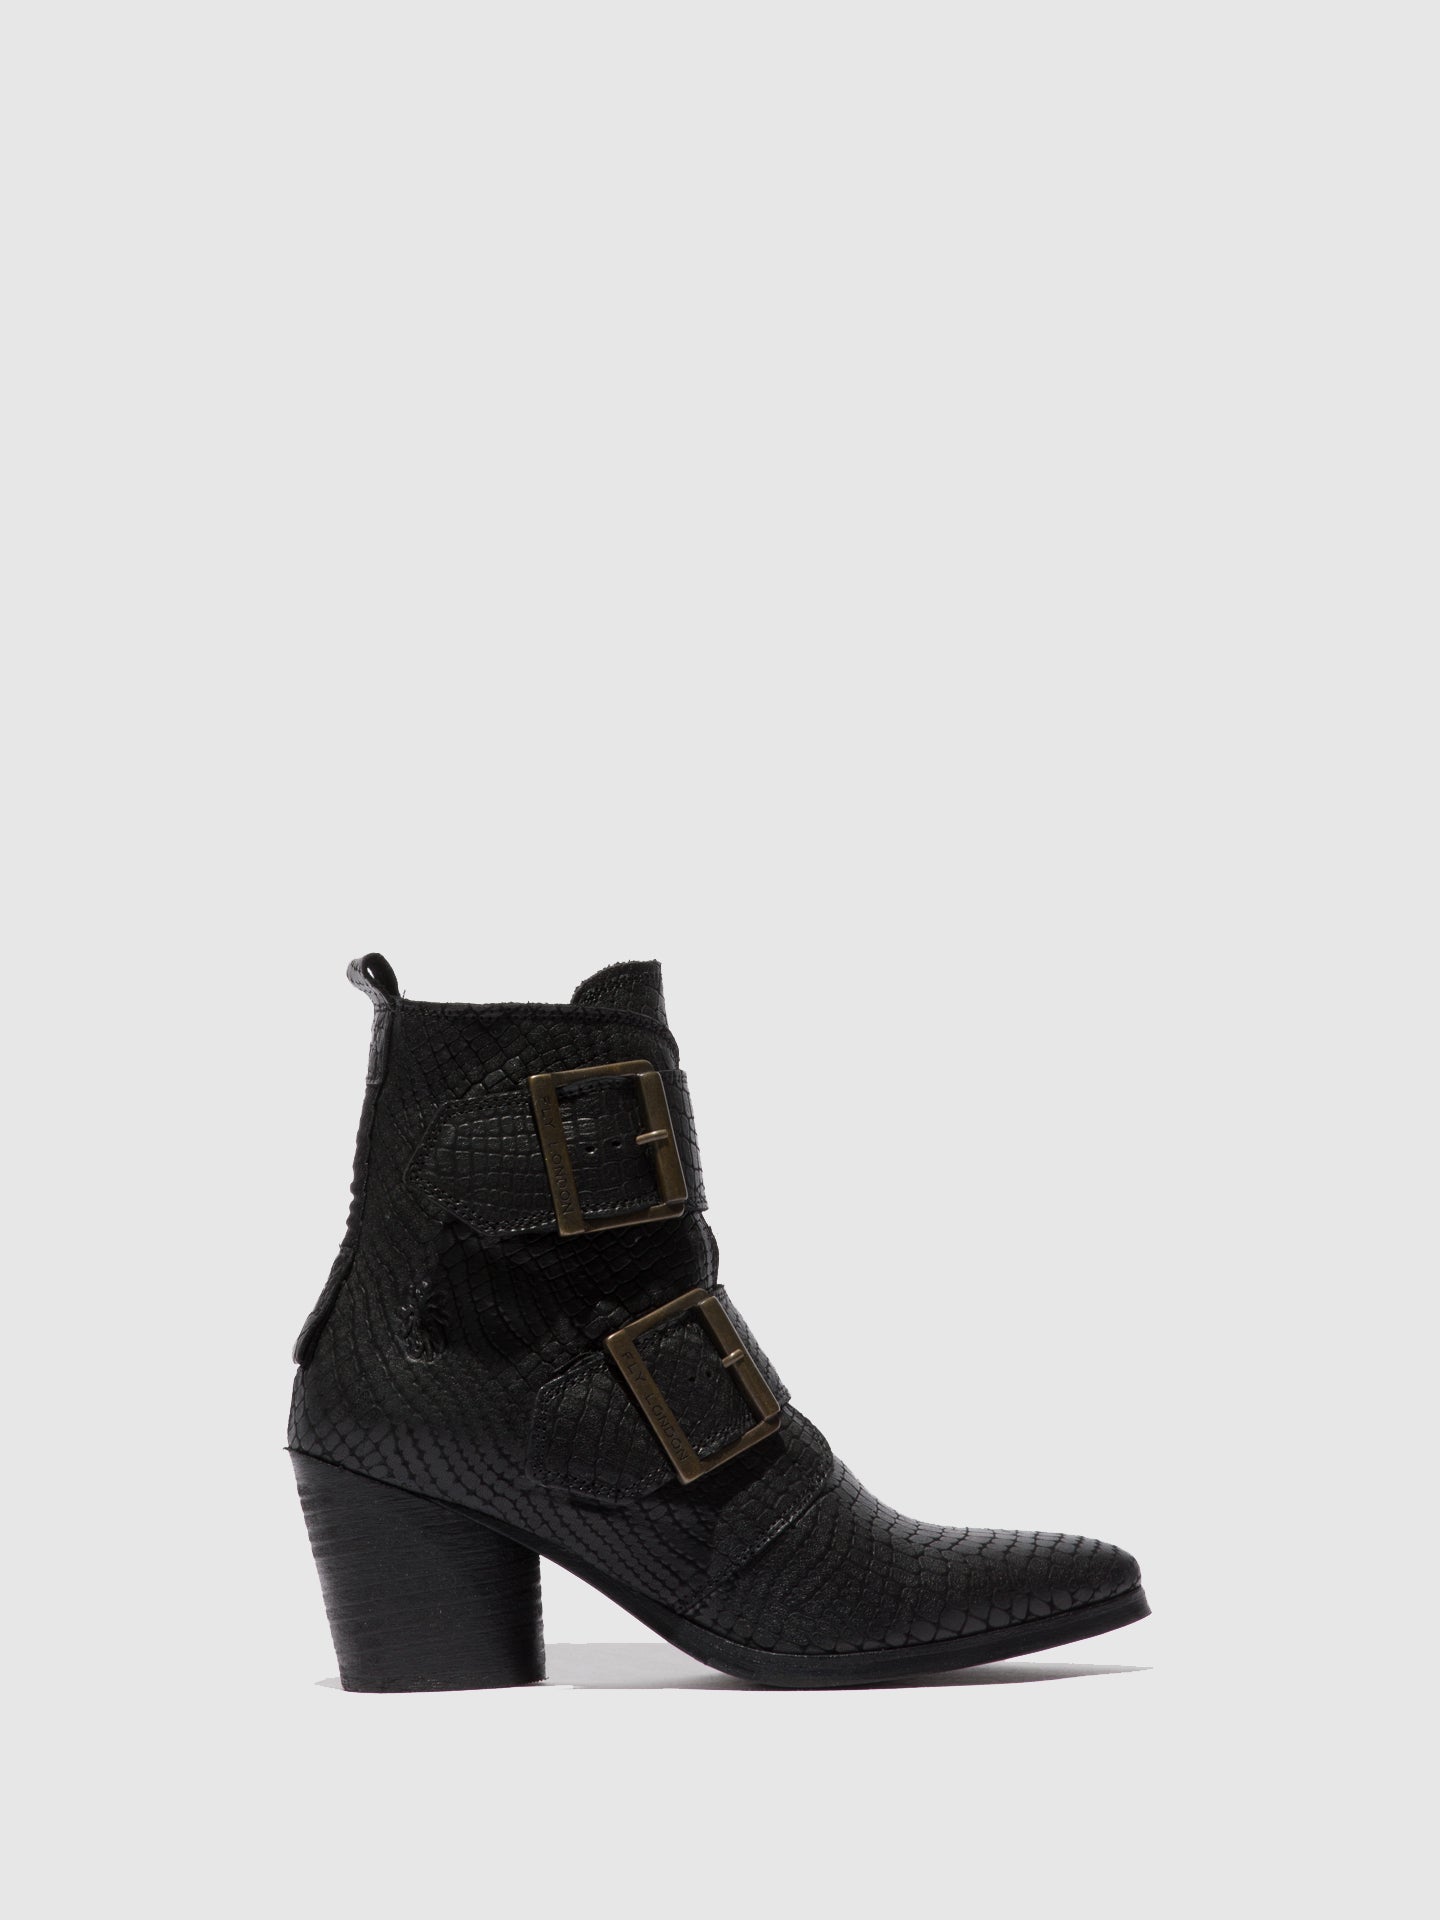 Fly London Buckle Ankle Boots ARIA827FLY CROCO BLACK